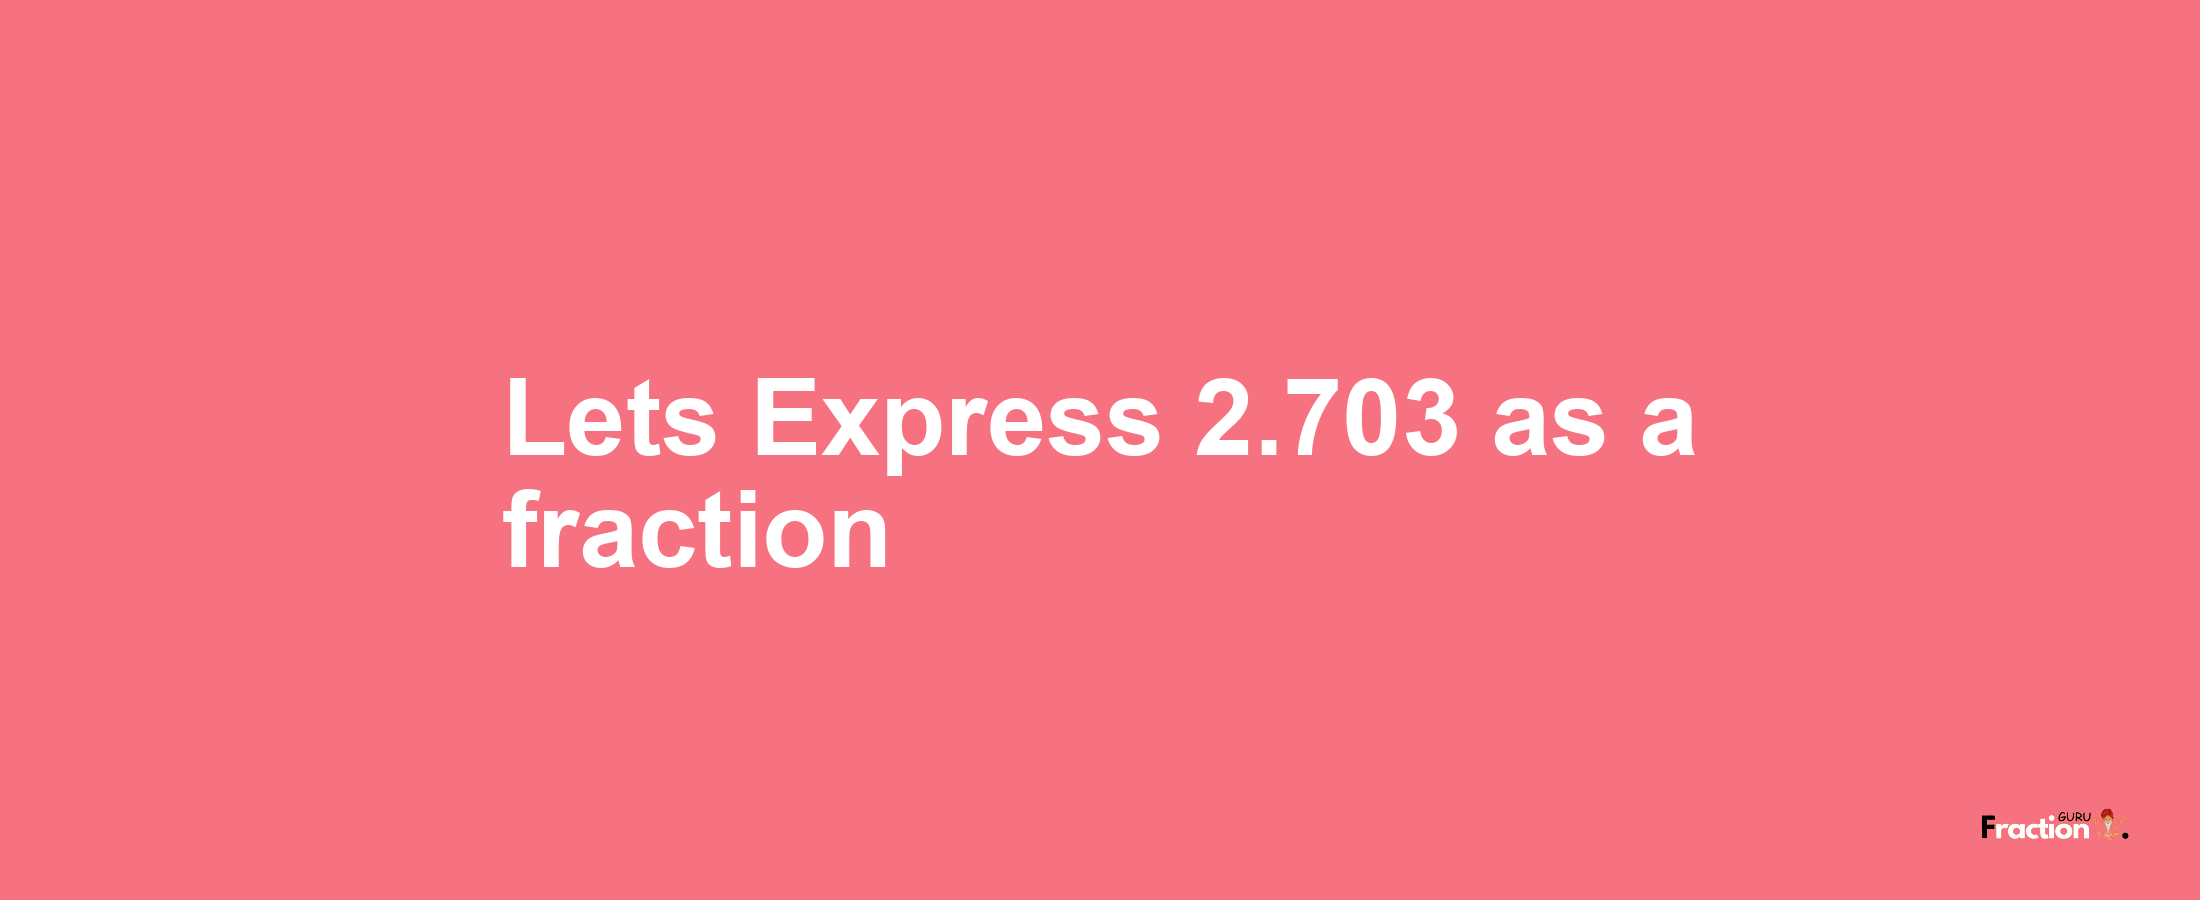 Lets Express 2.703 as afraction